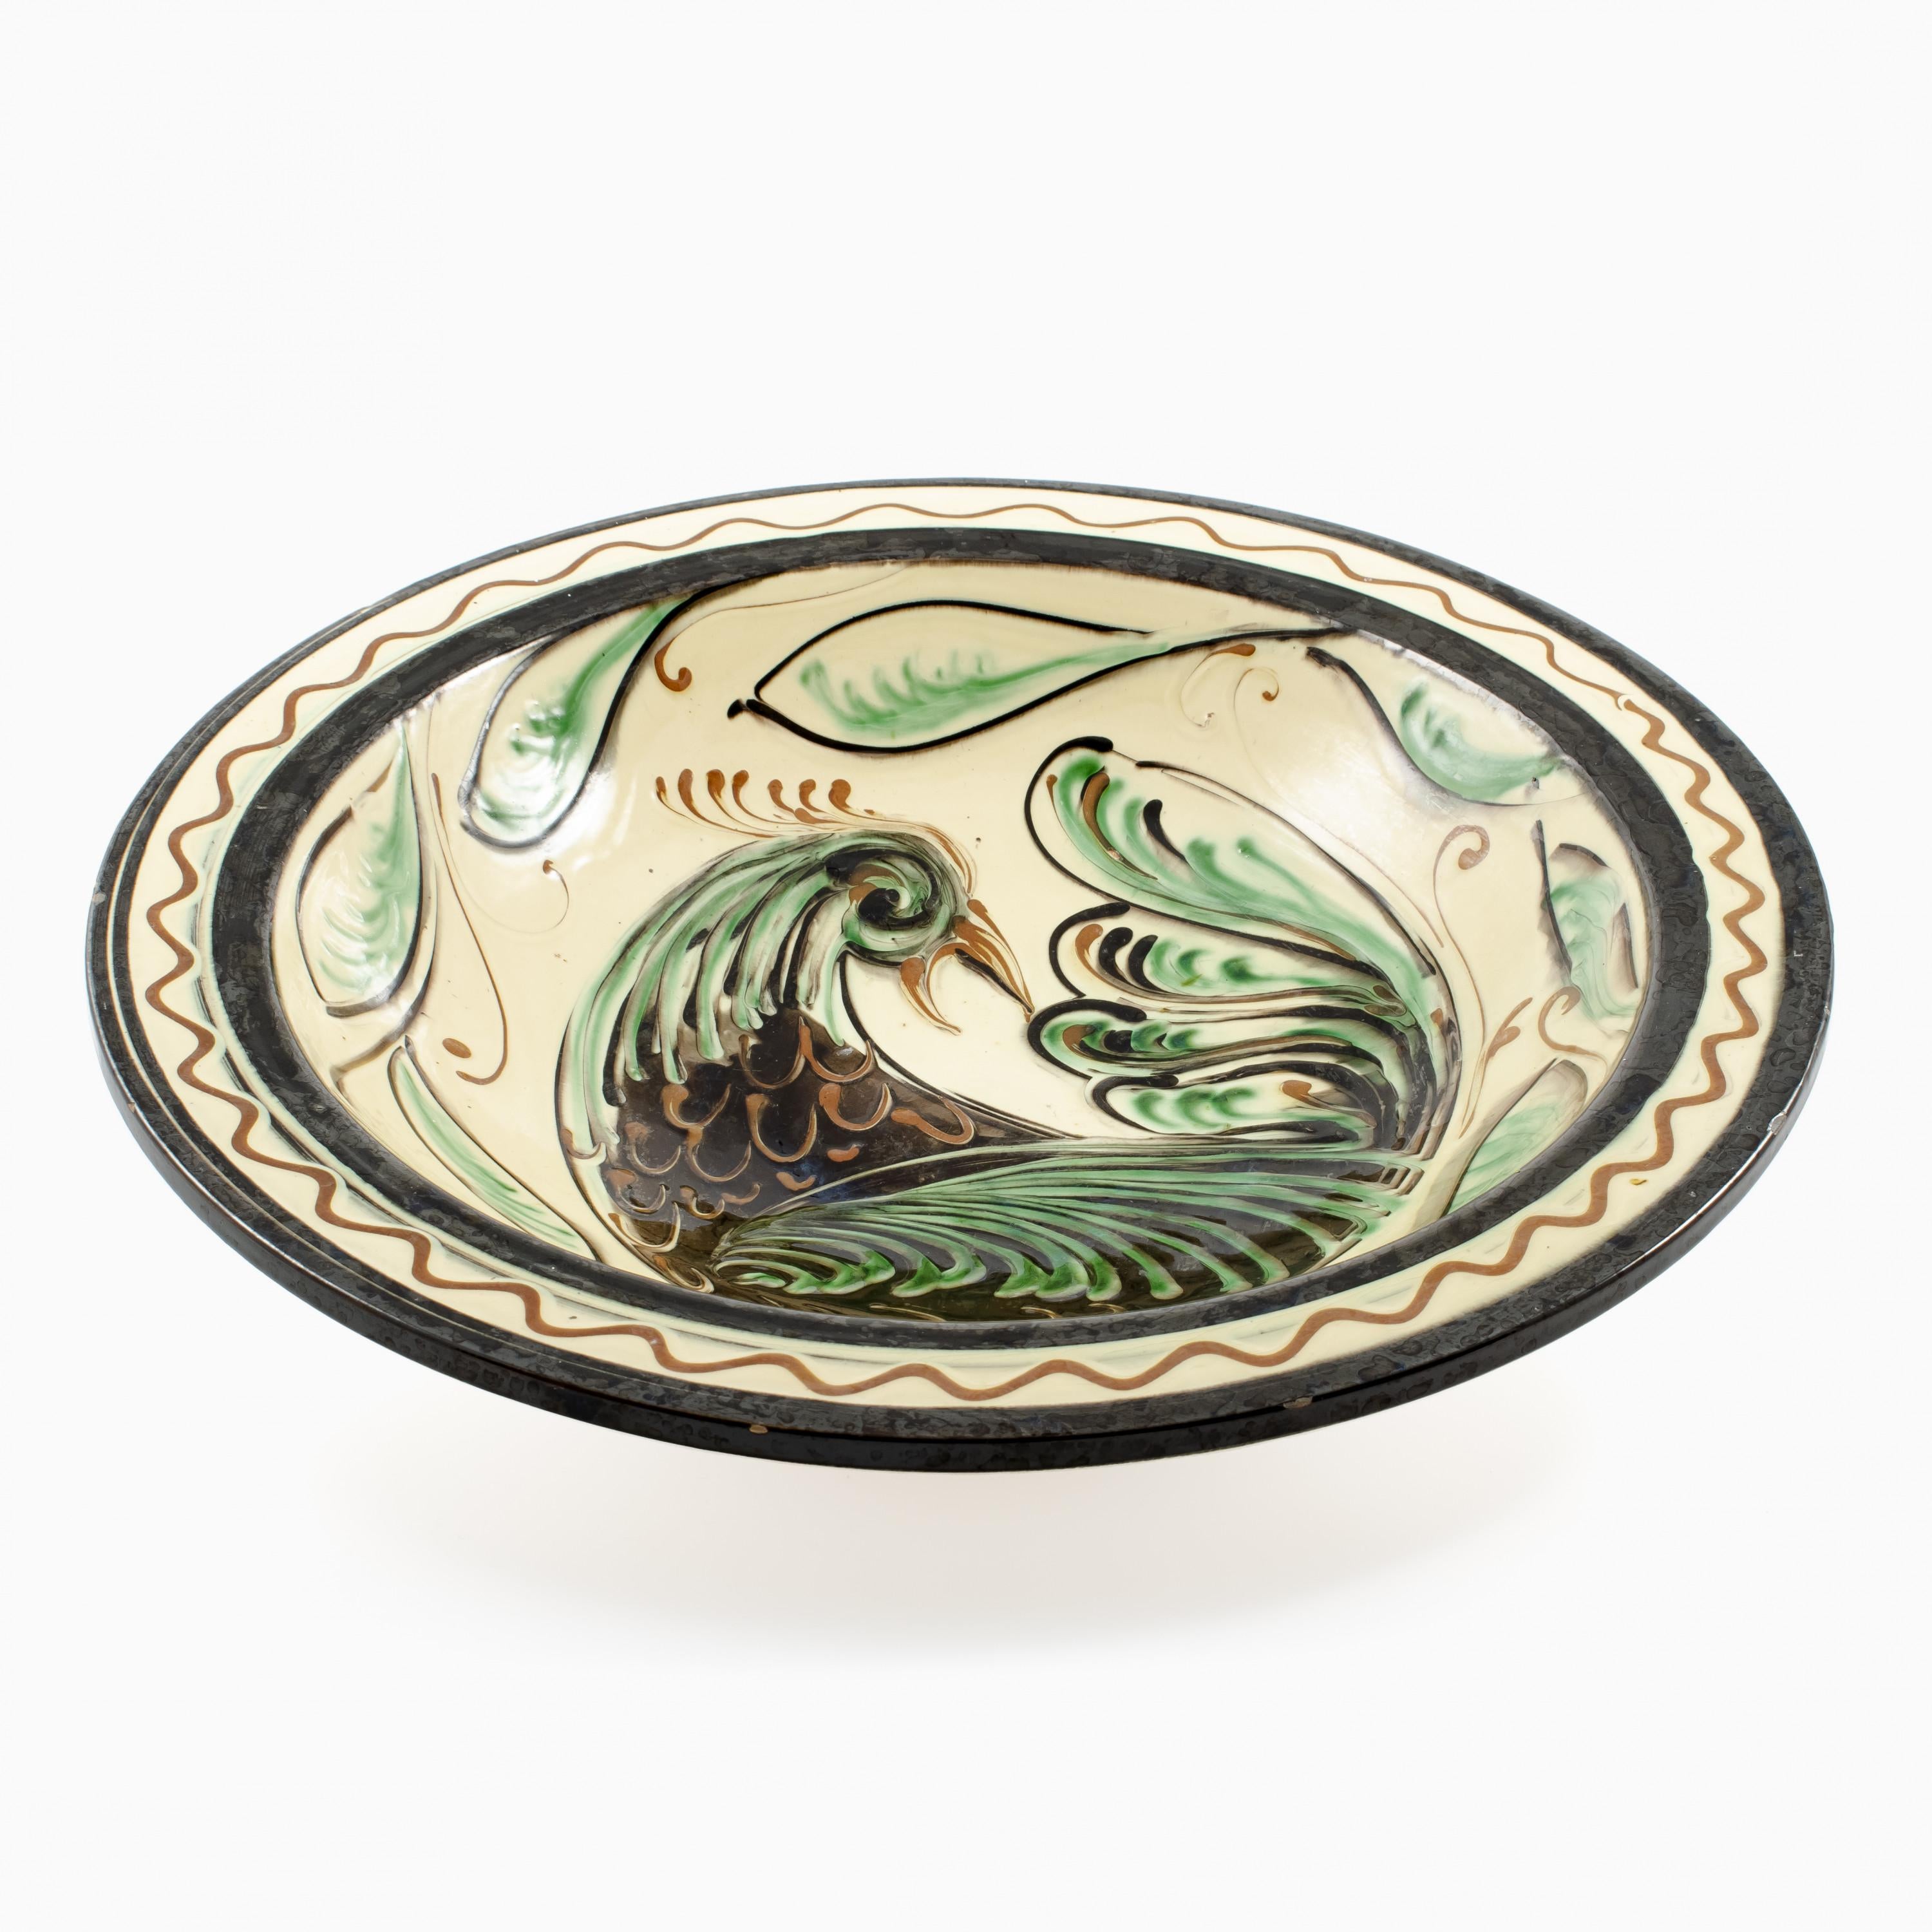 Large unique ceramic dish, Art Nouveau.
Design Julia Kabel for Kähler approx. 1910 - 1920.
Glaze with polychrome, decorated with birds and foliage.

Good condition. 
Minor defects of glaze on the edge.
 